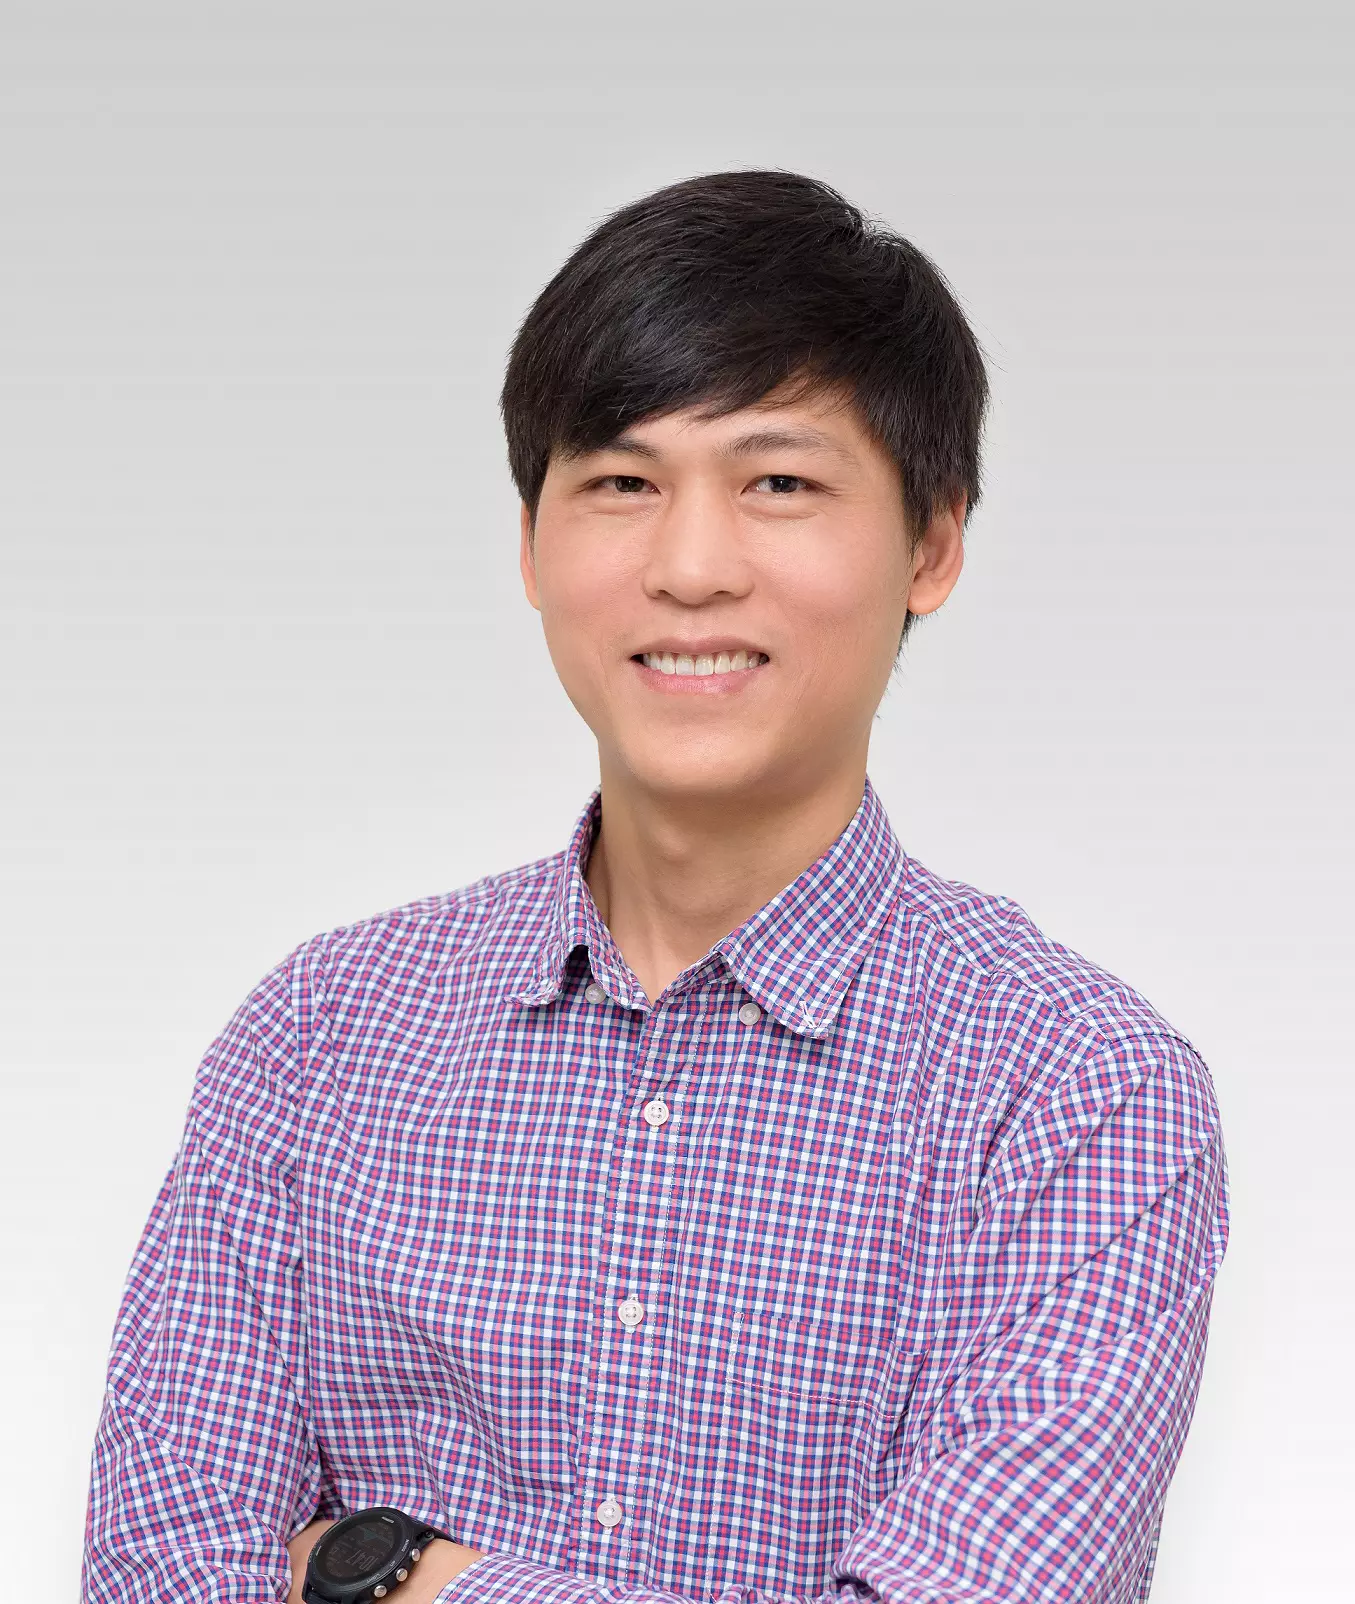 Mr Chuan - Chief Operating Officer - Co-founder Gigago